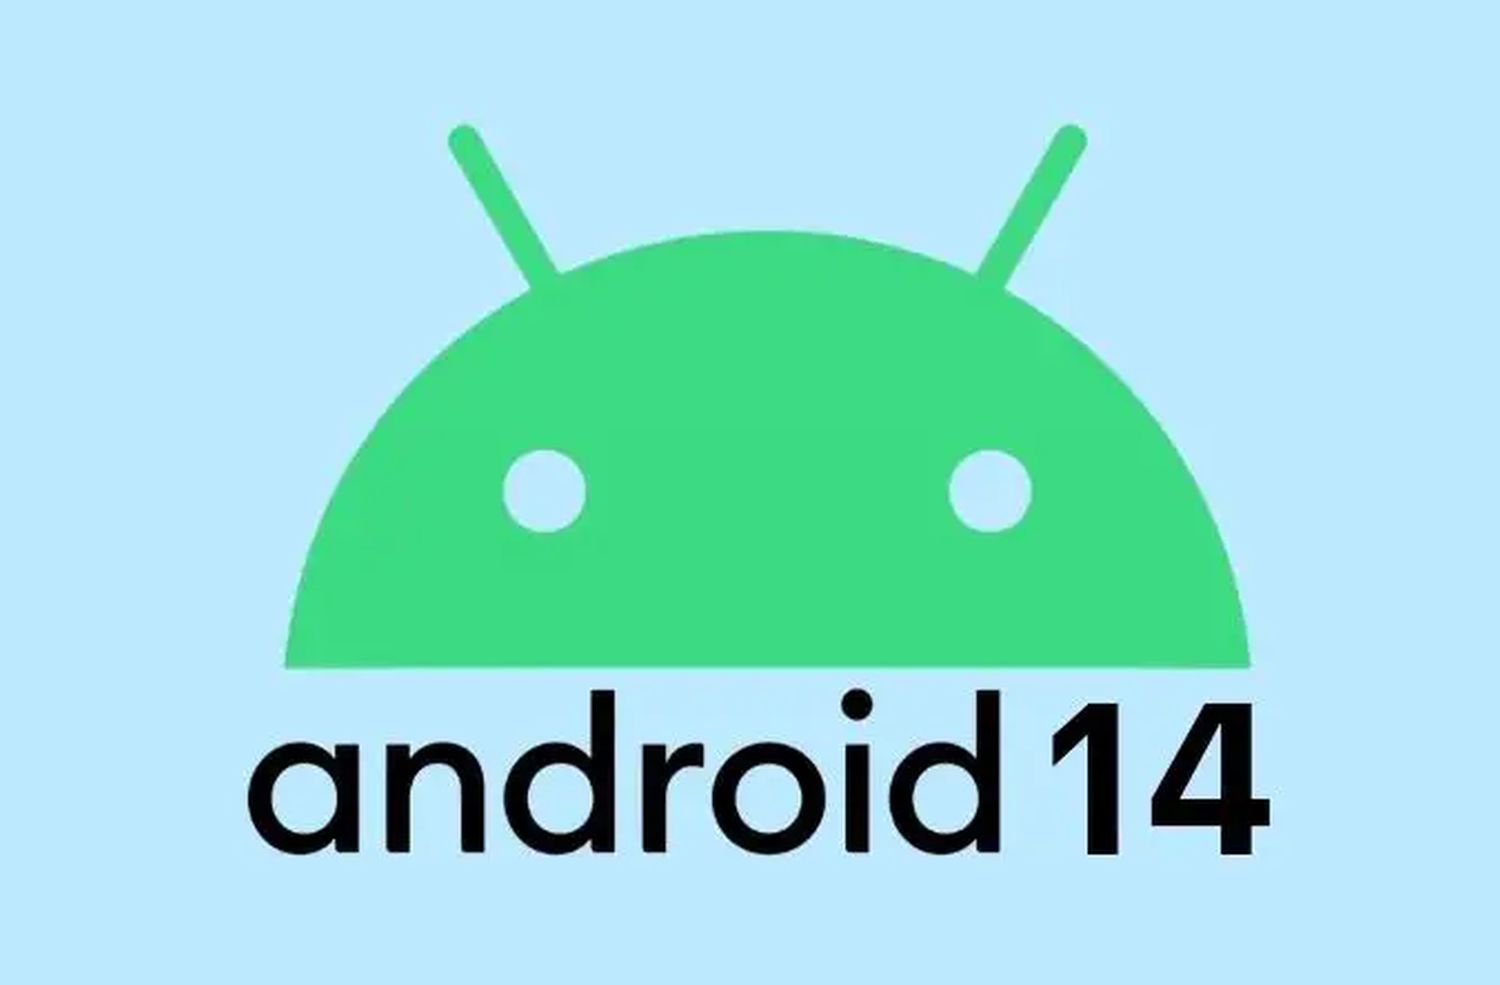 android 14 logo